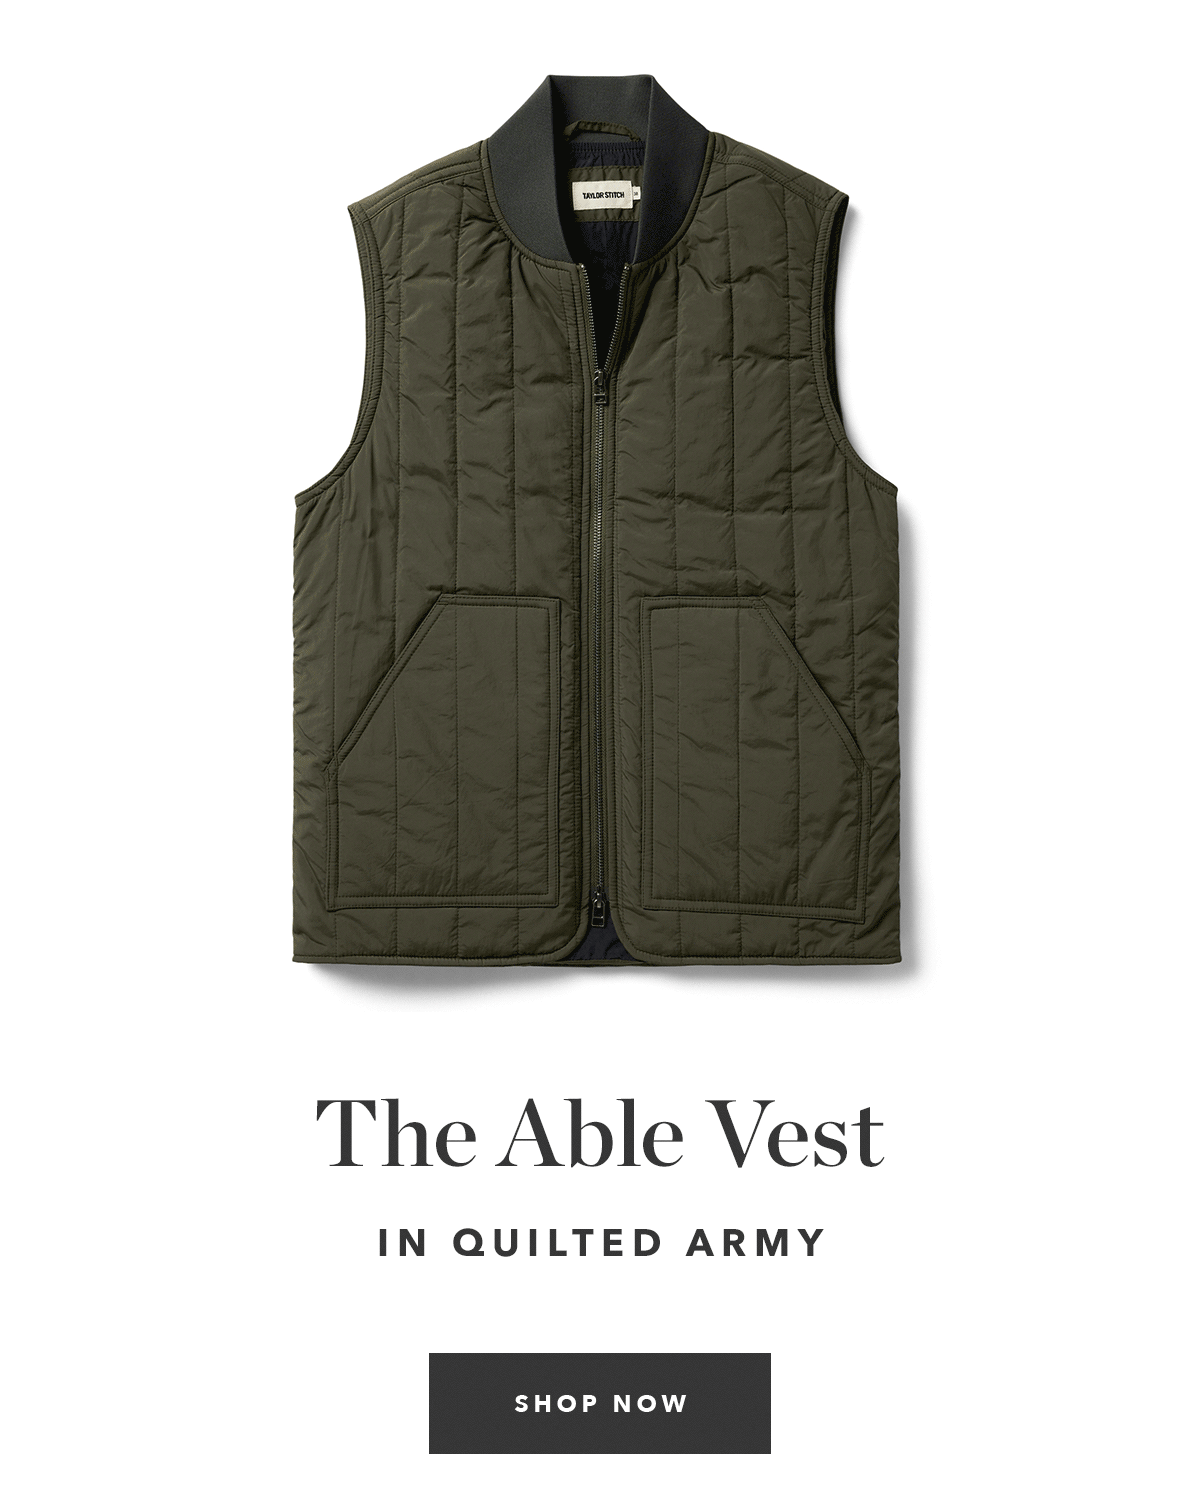 The Able Vest in Quilted Army